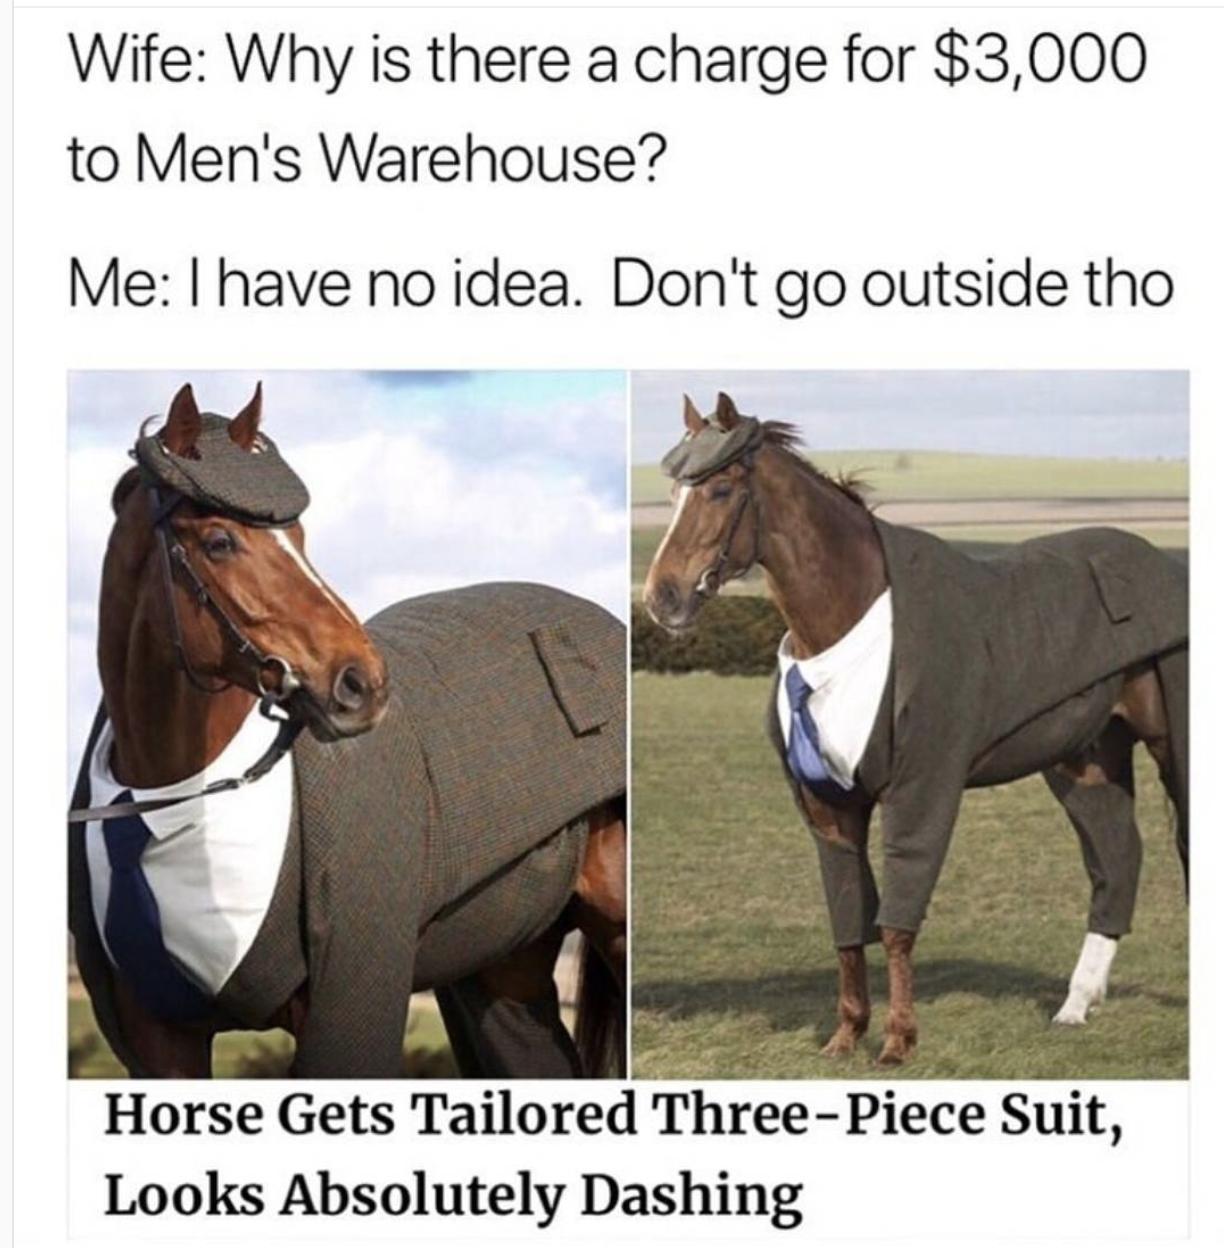 memes - horse gets tailored three piece suit - Wife Why is there a charge for $3,000 to Men's Warehouse? Me I have no idea. Don't go outside tho Horse Gets Tailored ThreePiece Suit, Looks Absolutely Dashing